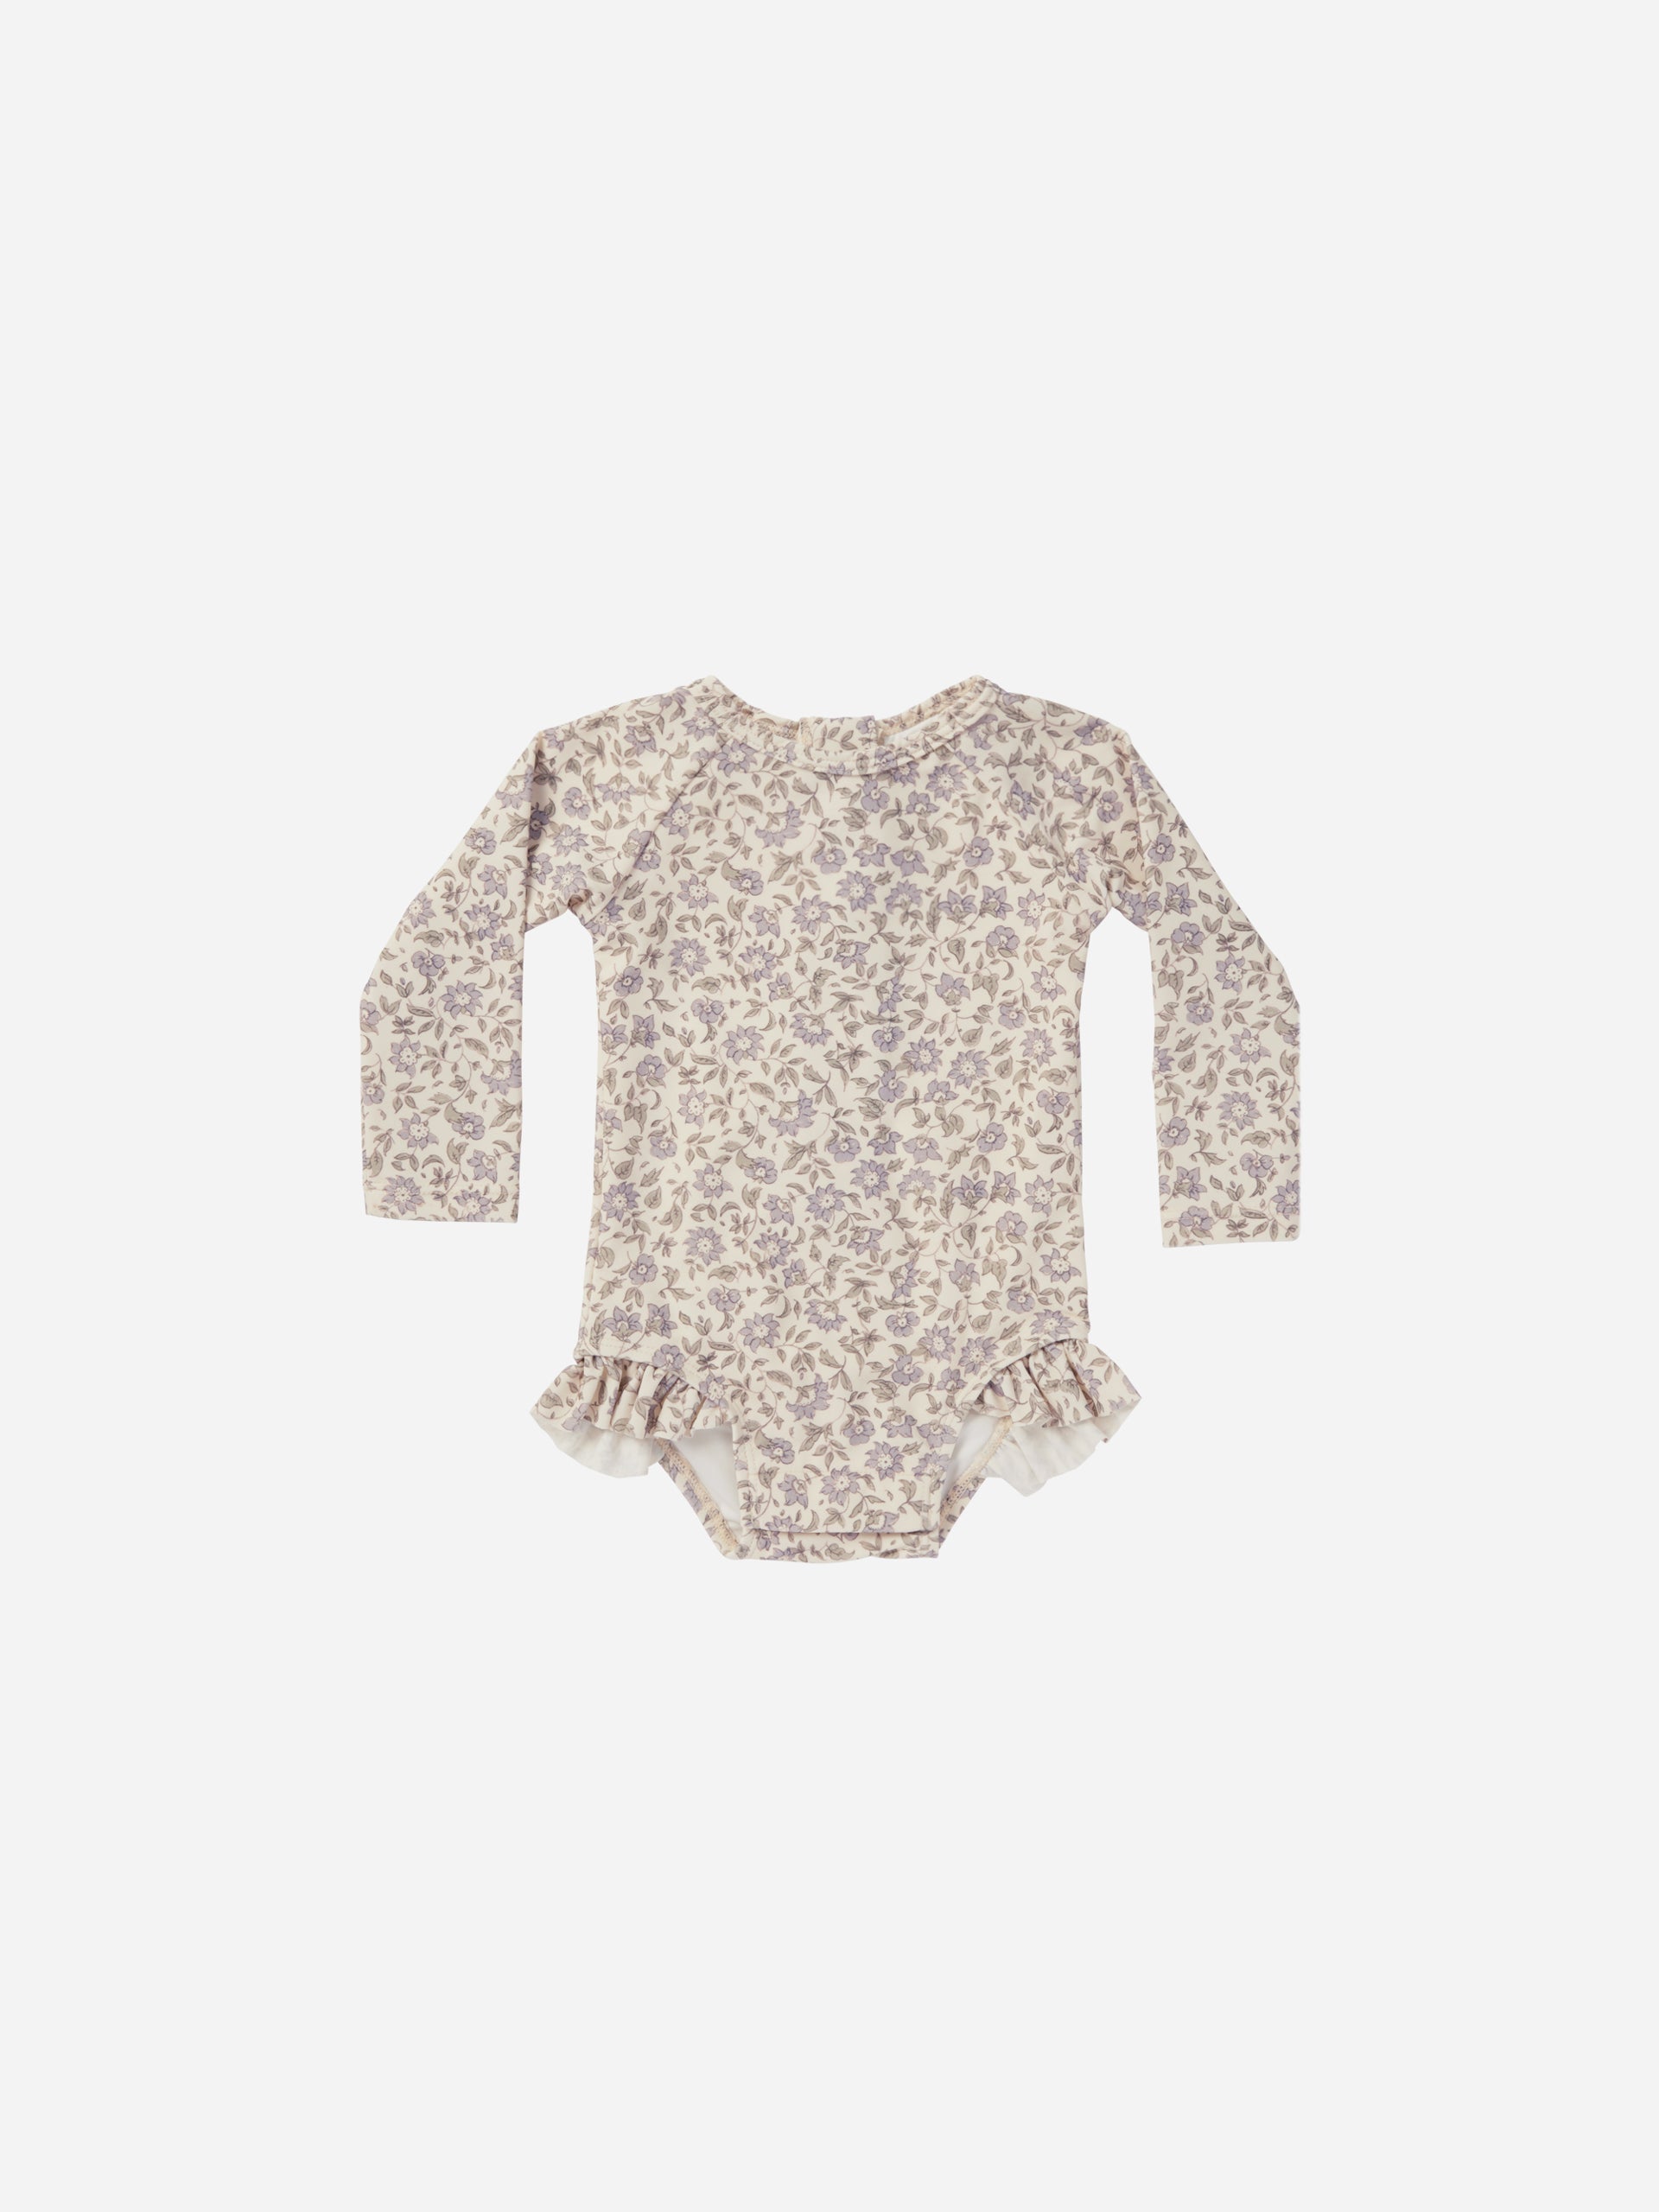 Olivia Rashguard One-Piece || French Garden - Rylee + Cru | Kids Clothes | Trendy Baby Clothes | Modern Infant Outfits |